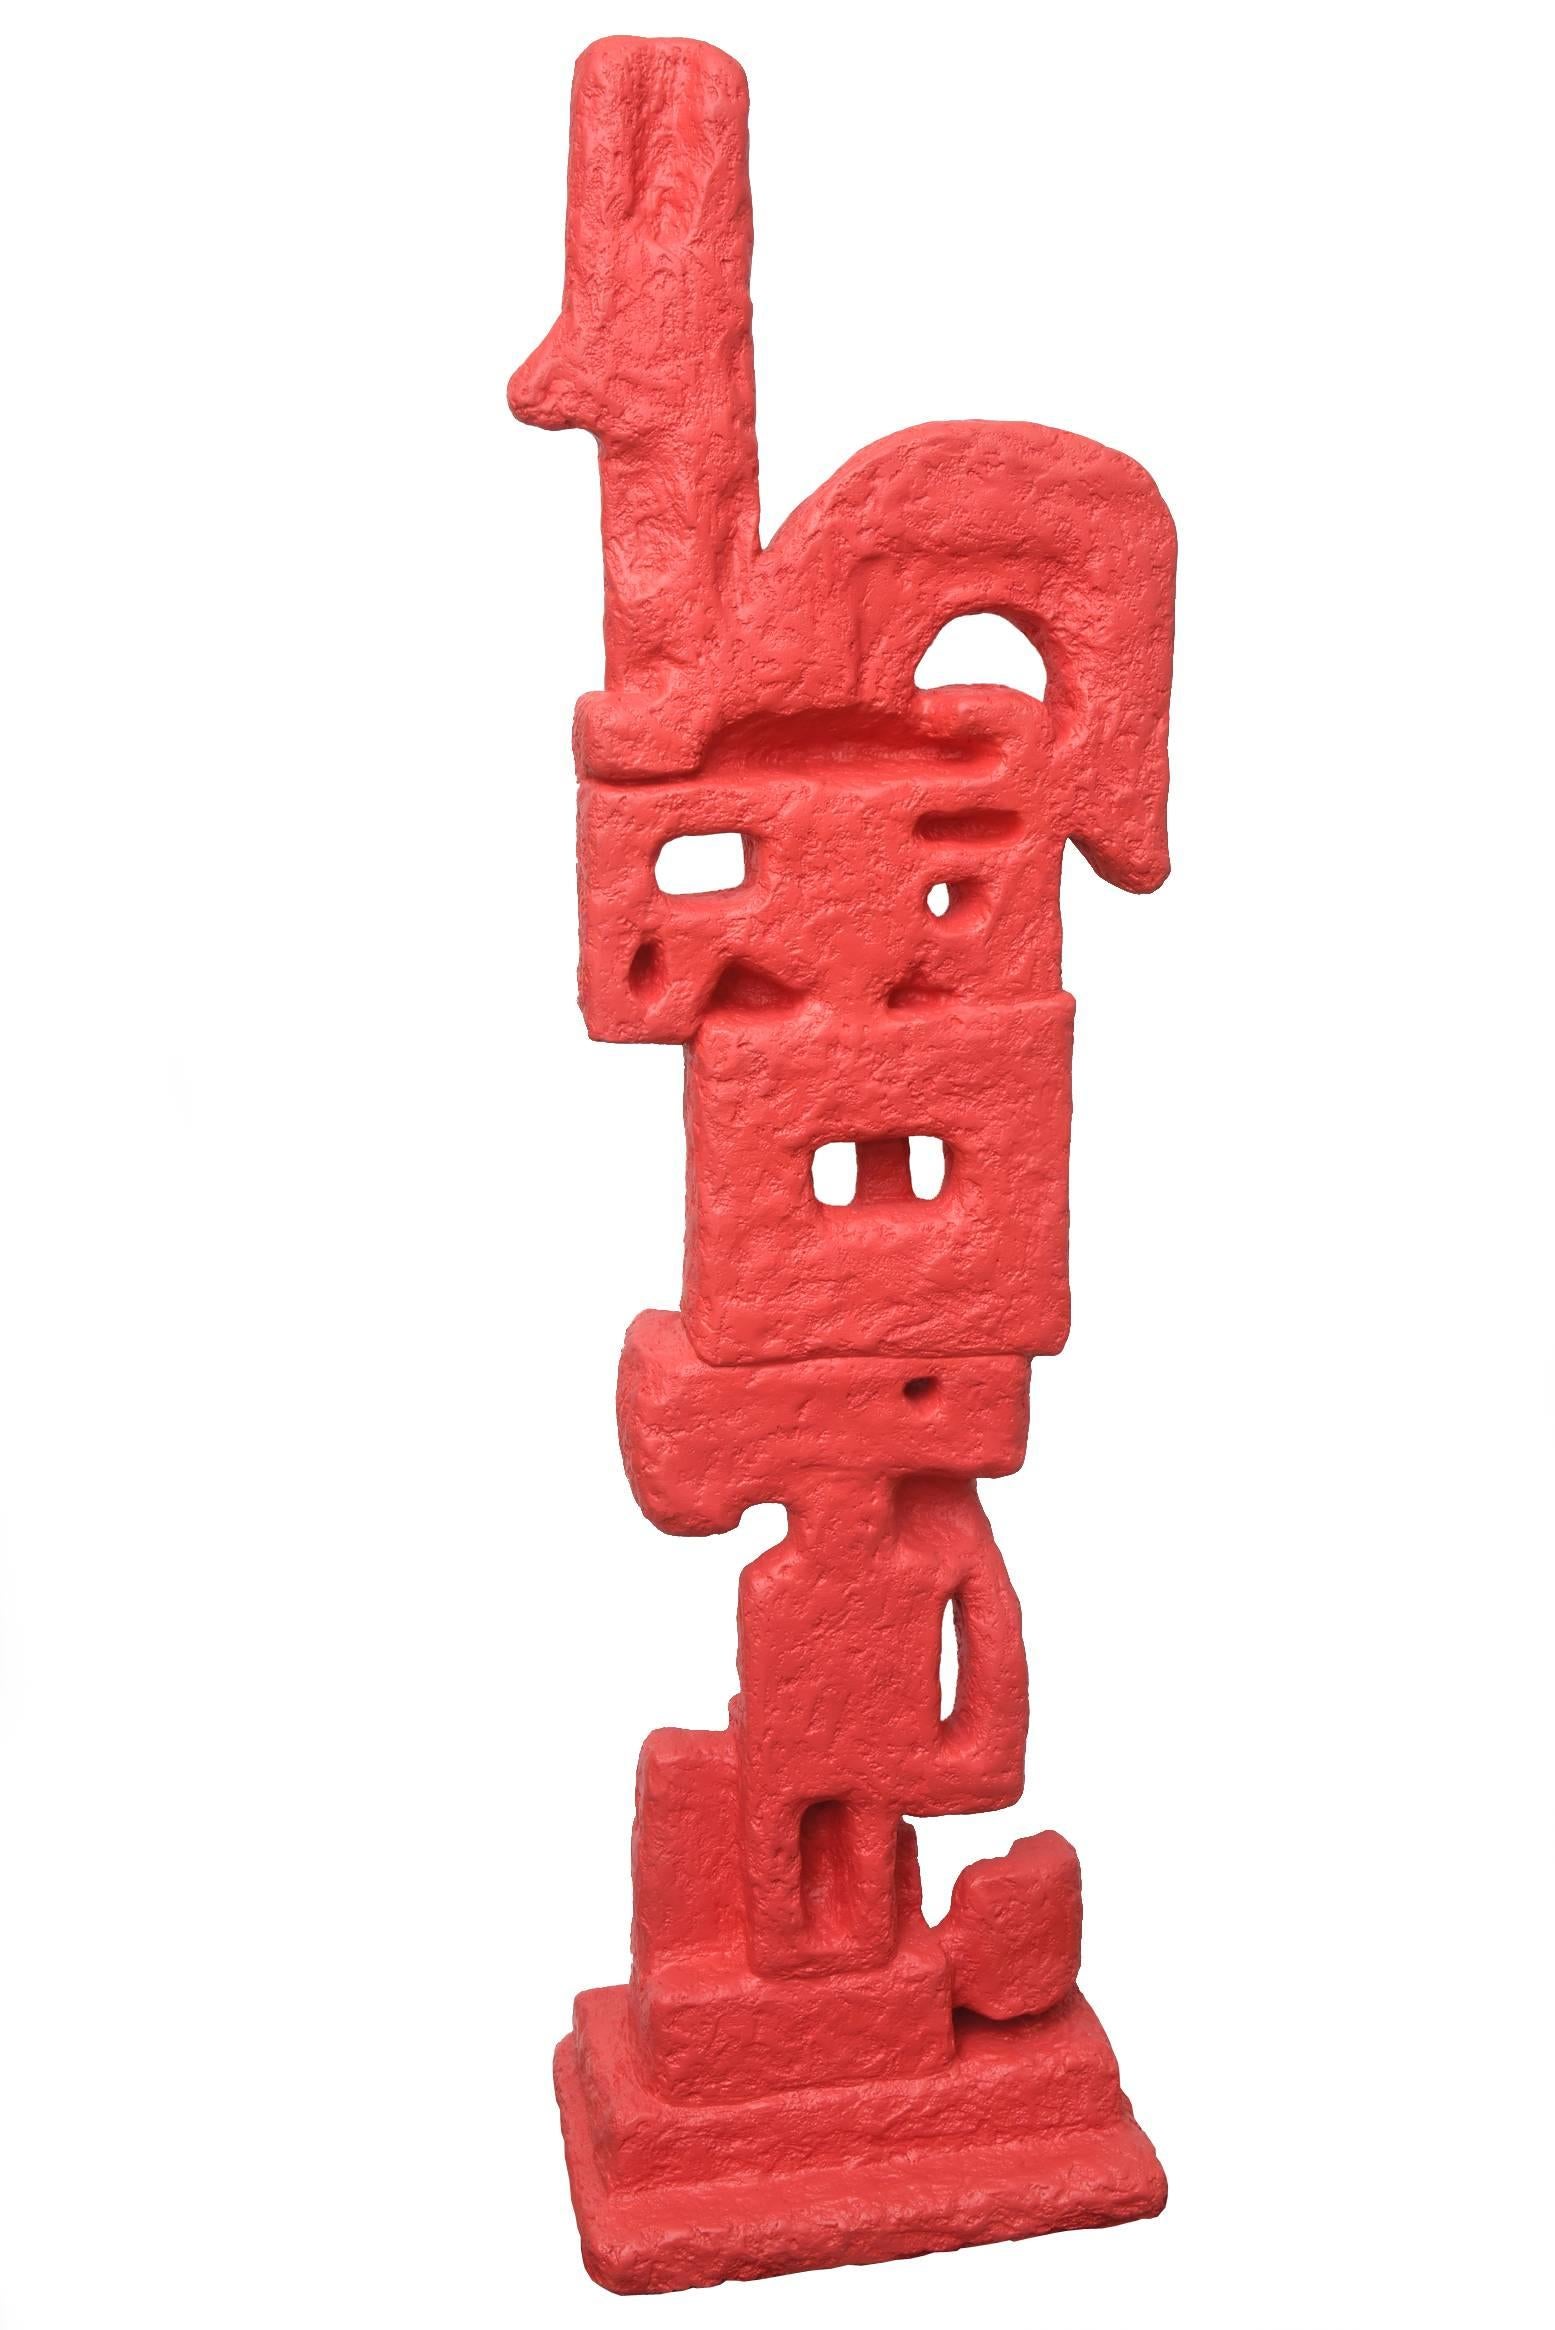 This monumental and arresting abstract tall life-size floor sculpture is a mixed-media of plaster of pairs over molded fiberglass with red rub paint. It rotates and pivots from side to side from the bottom. It is not signed but one of a kind and